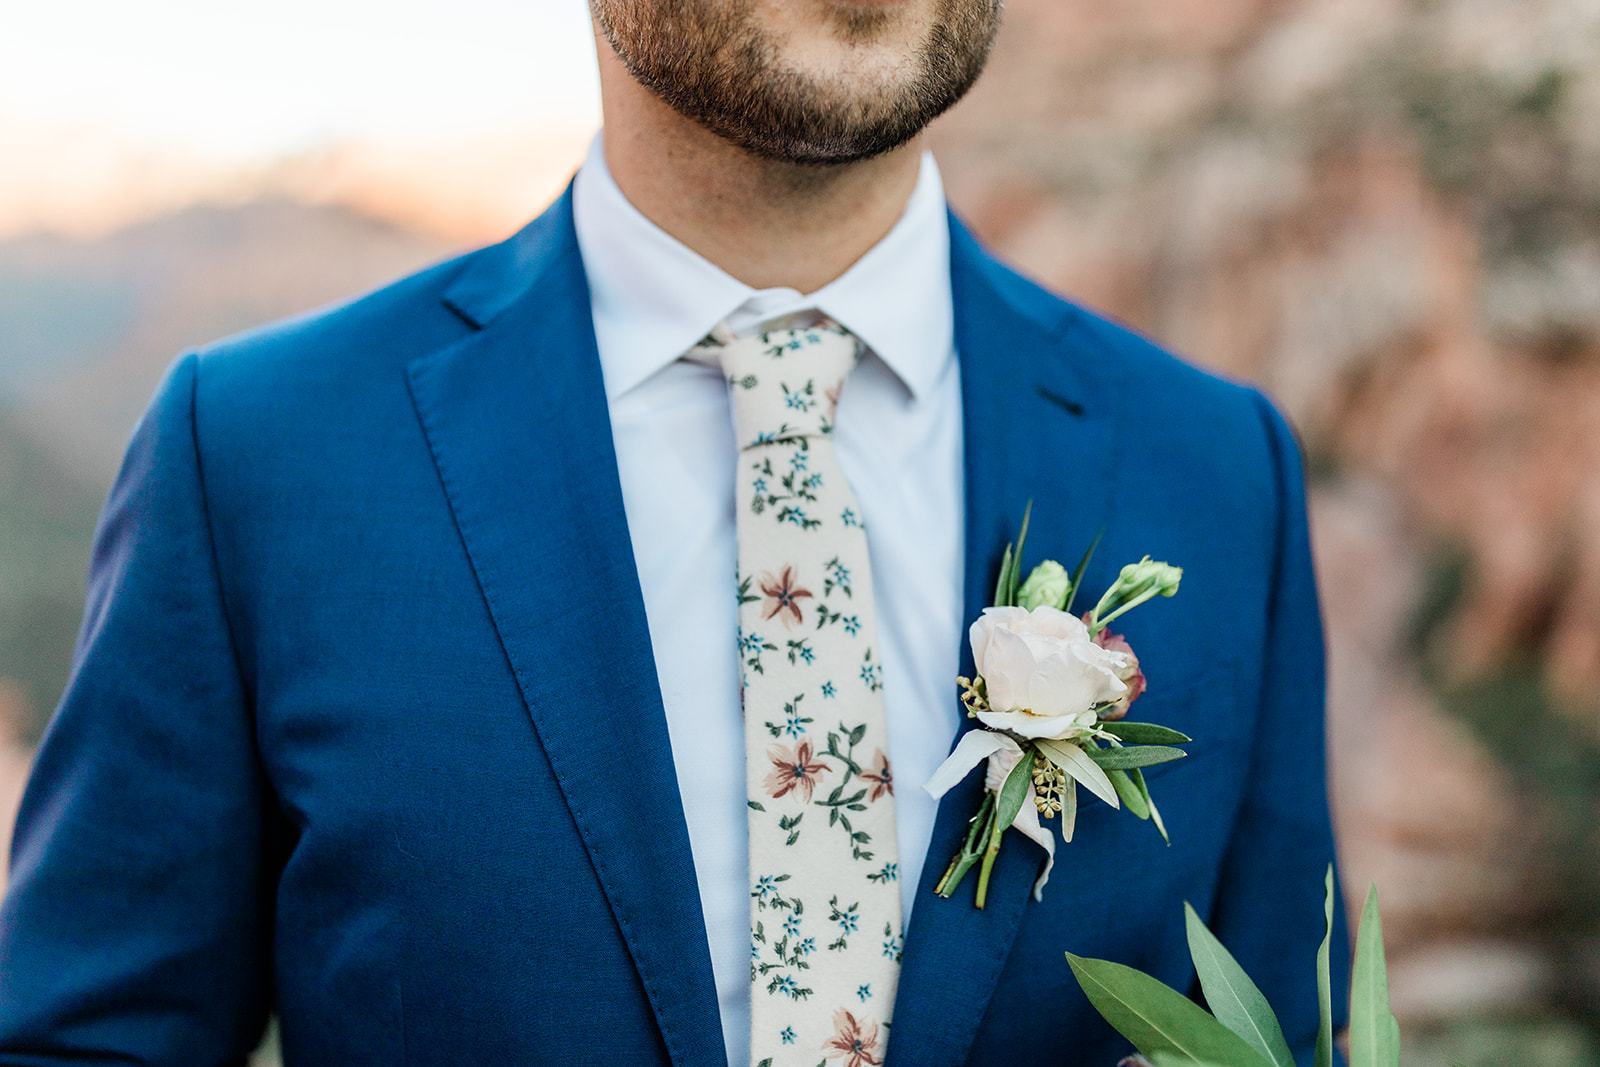 groom details: floral tie and boutonniere 